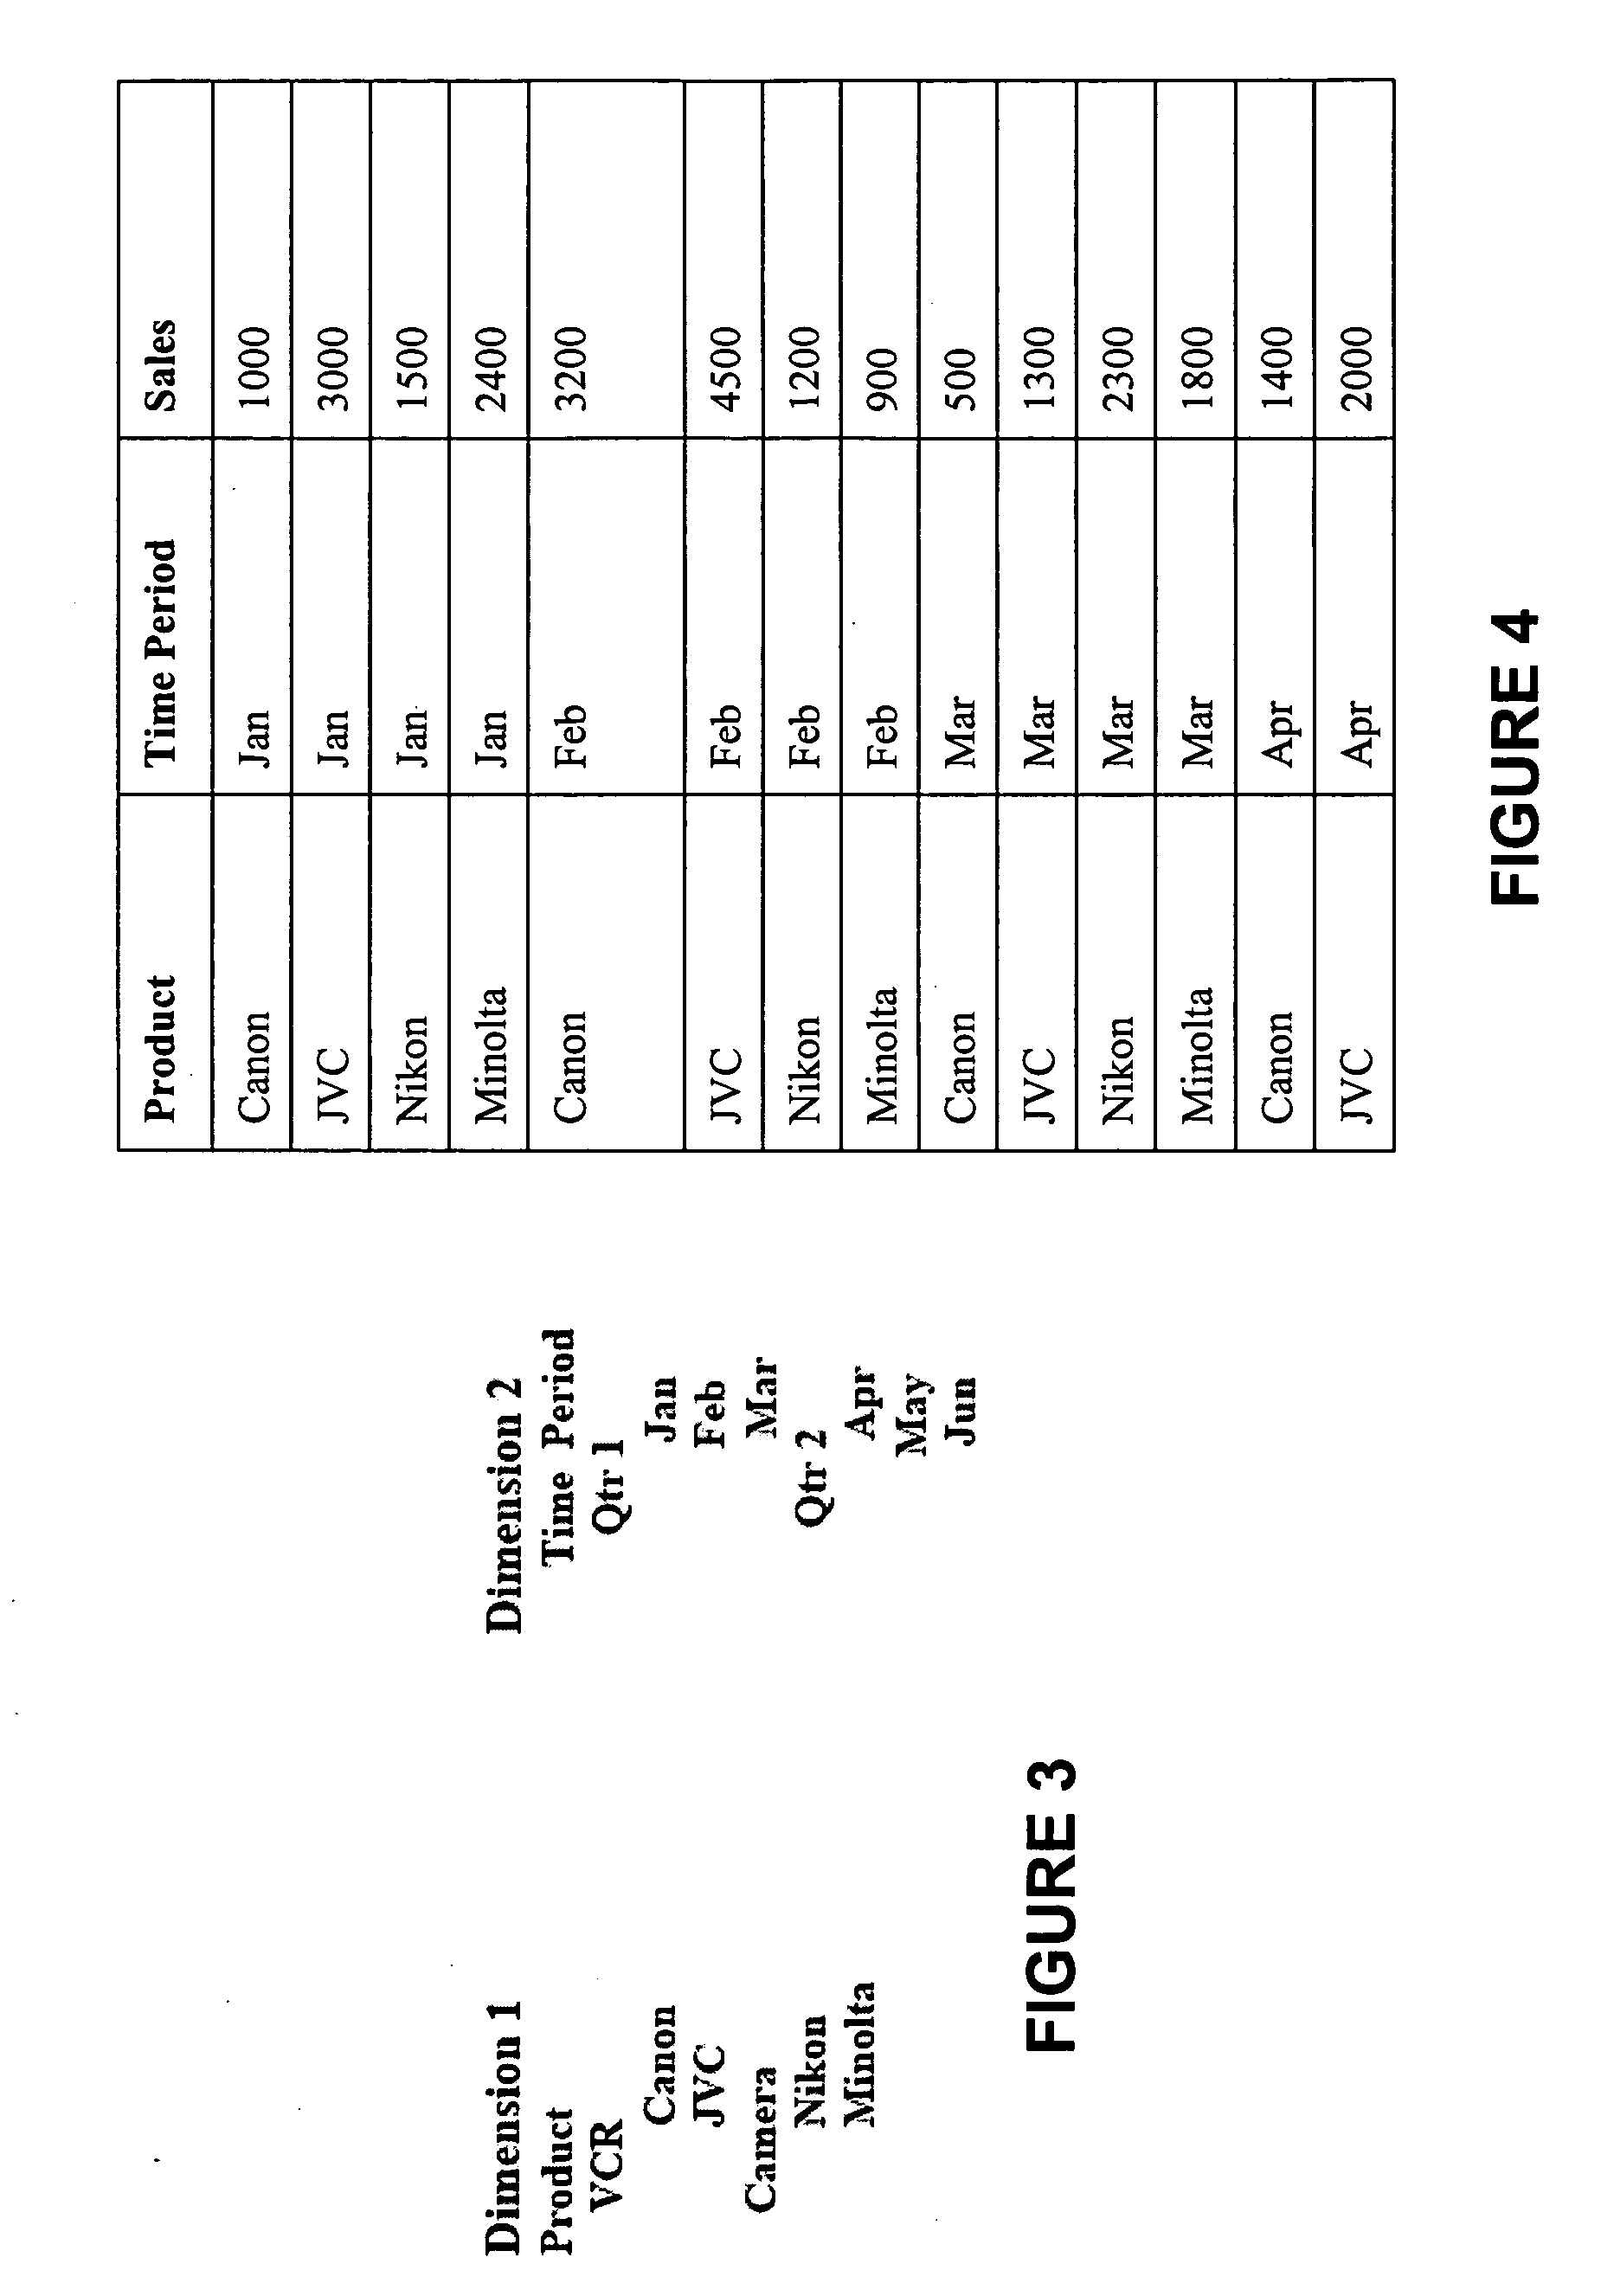 System and method for analyzing and reporting extensible data from multiple sources in multiple formats